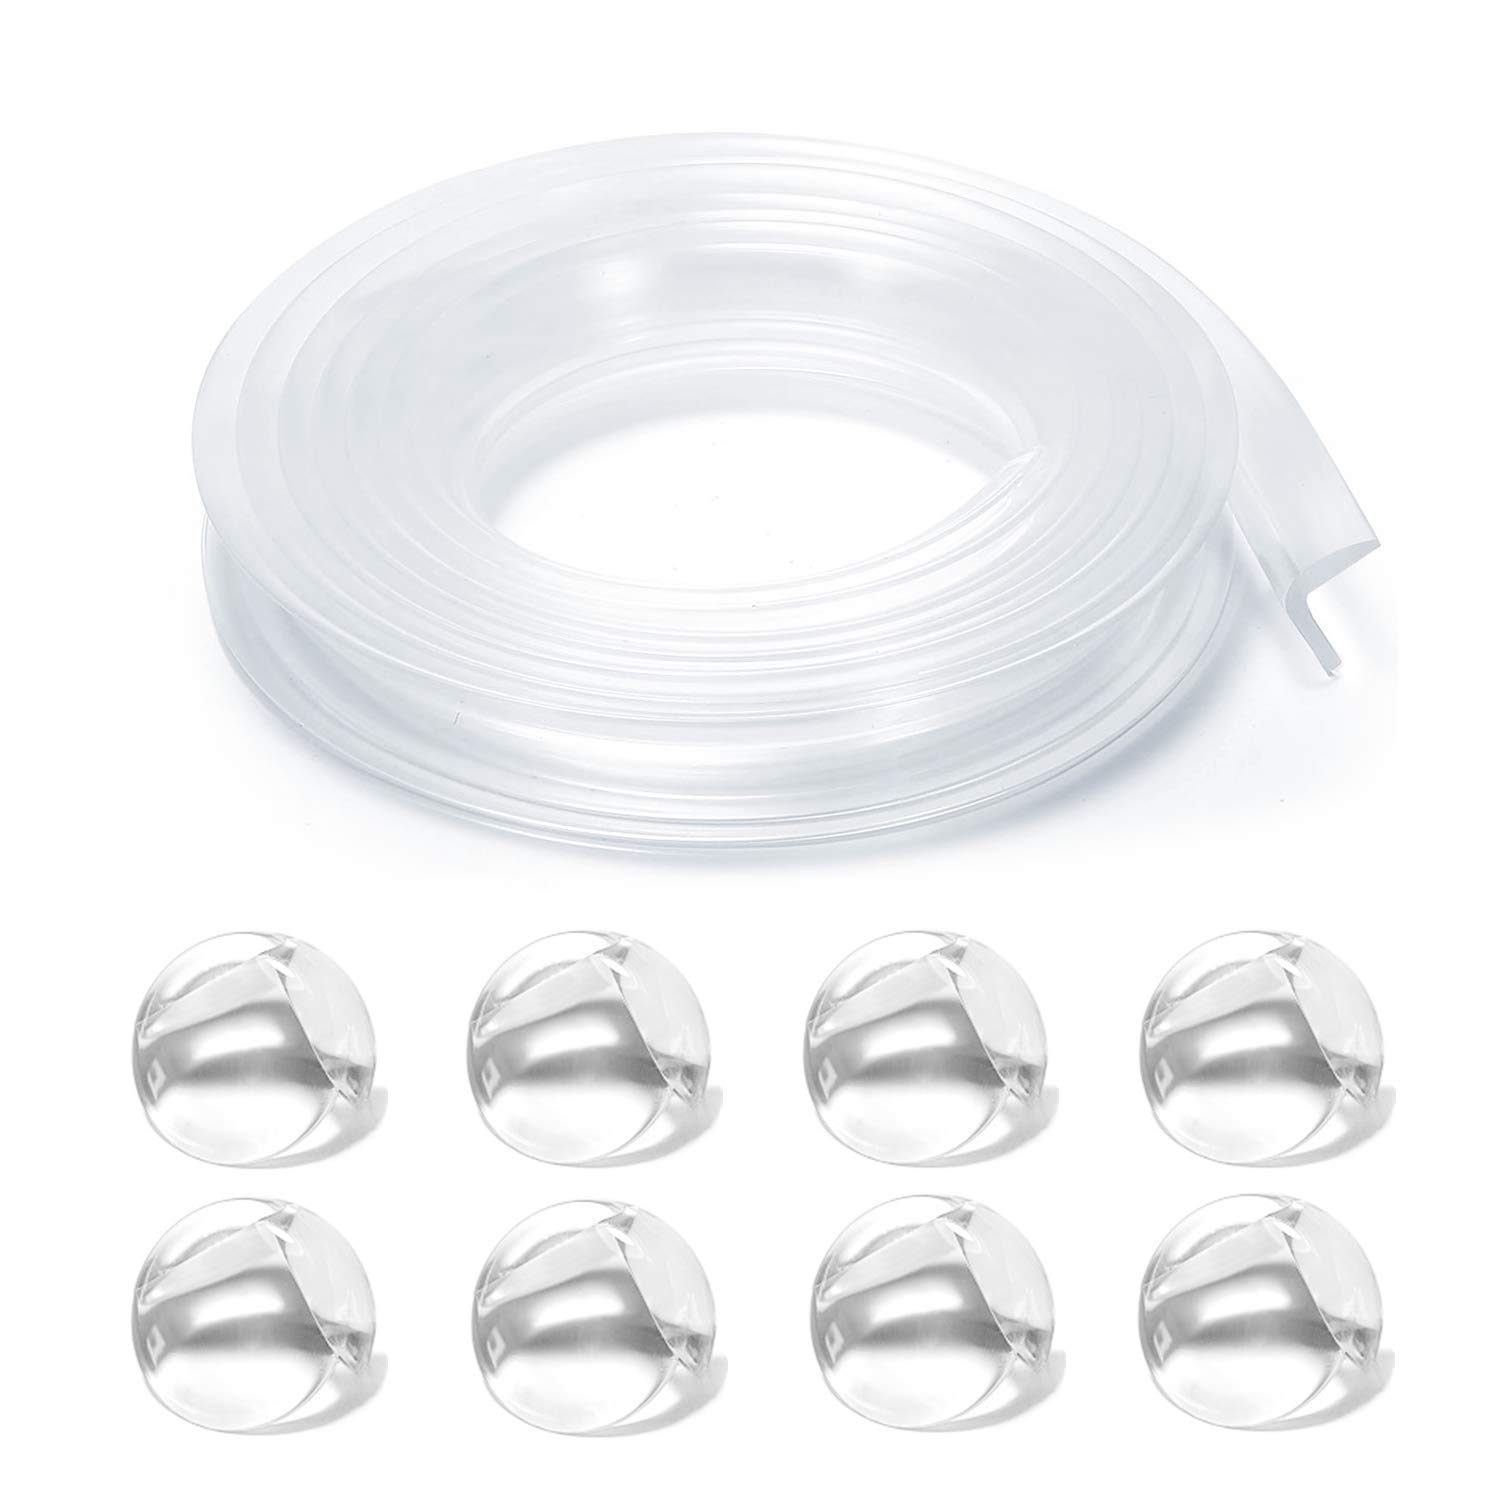 Baby Proofing Edge Protector Strip Clear, Soft Corner Protectors